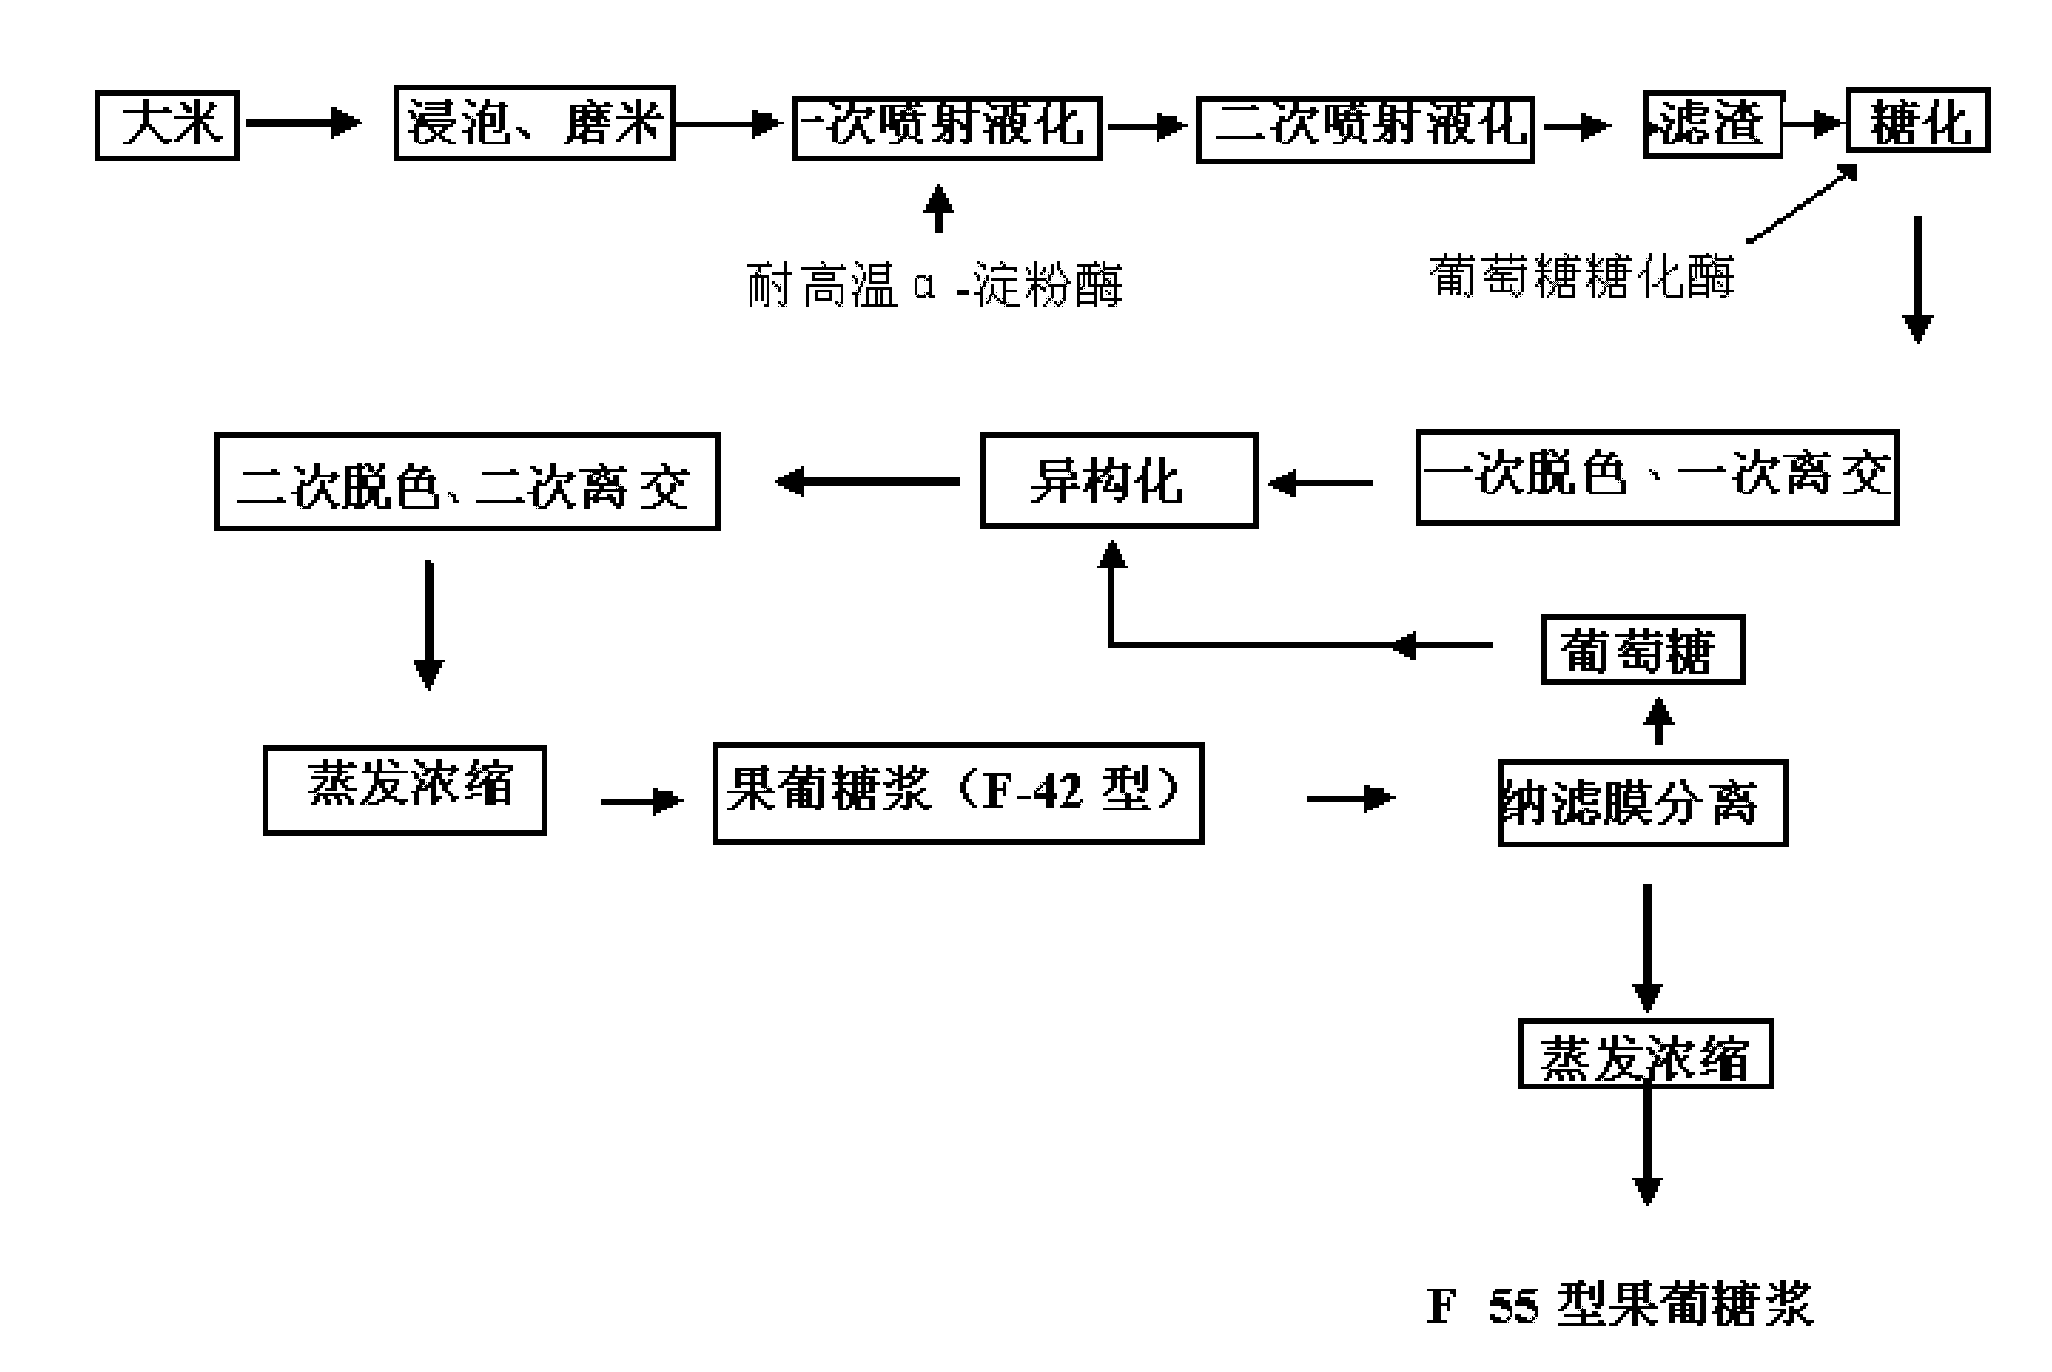 Process for producing high fructose syrup with a content of 55% with rice